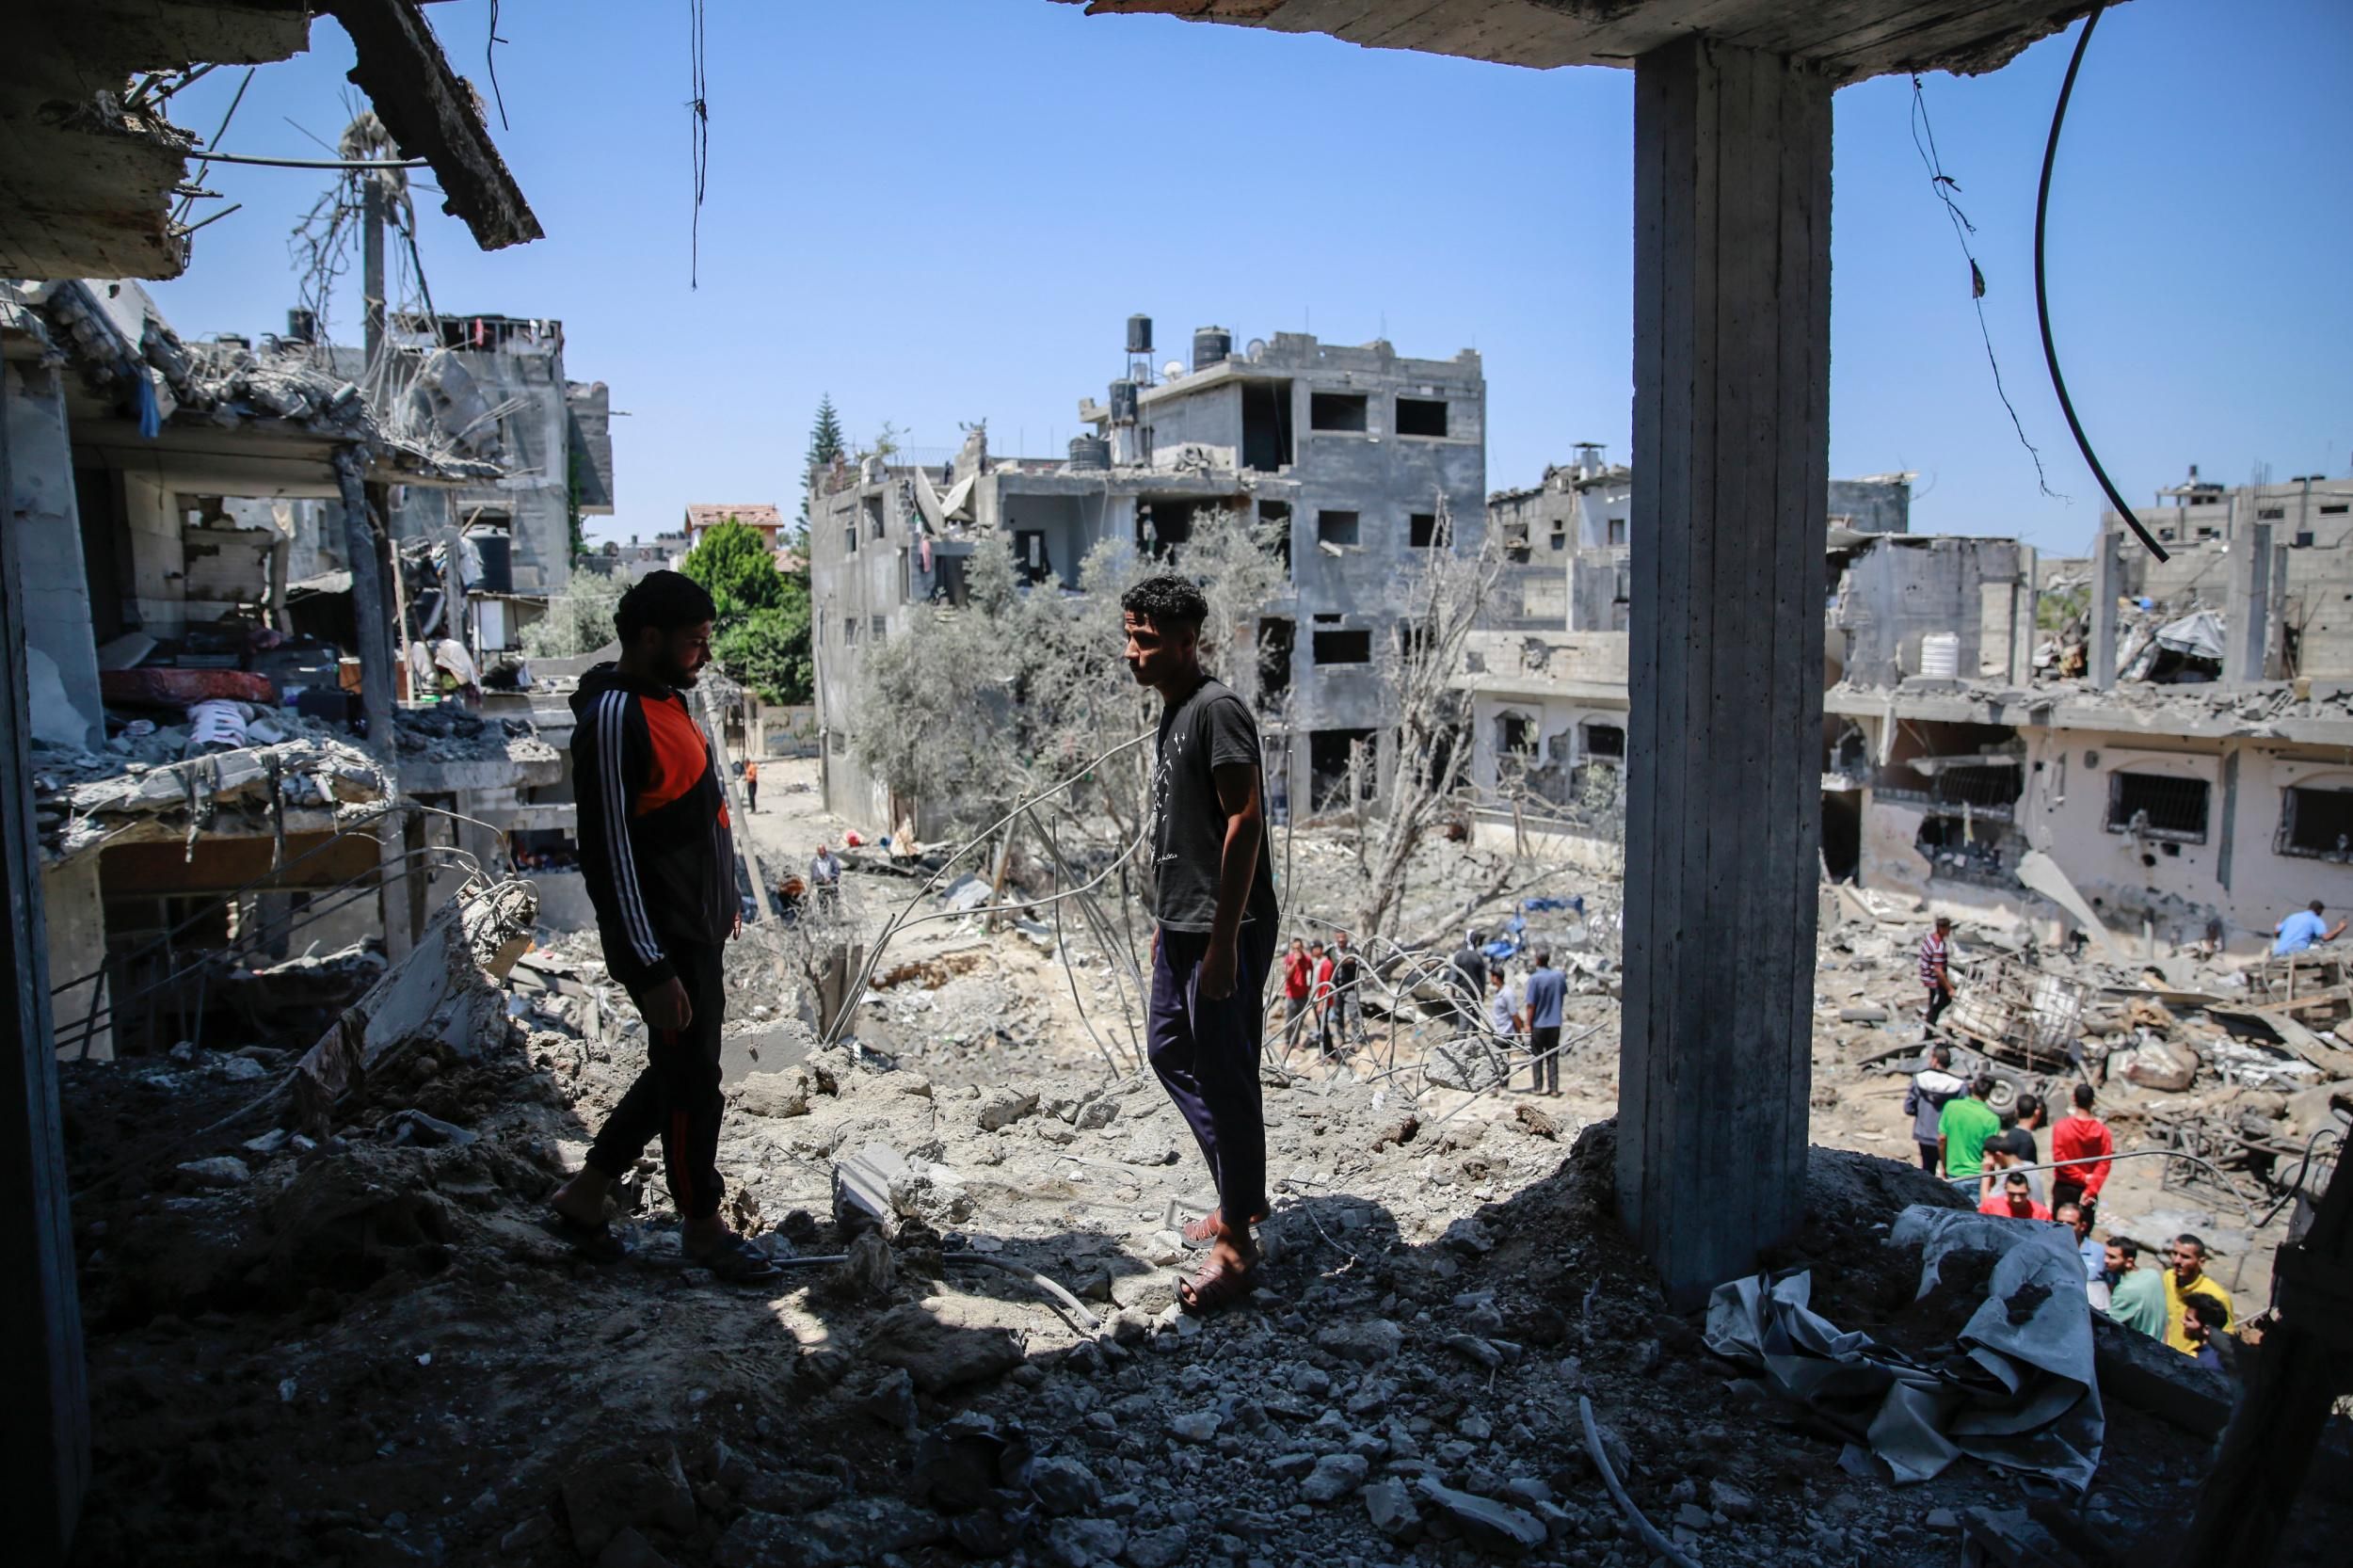 Gaza residents gather at the site of homes destroyed by Israeli air and artillery attacks on May 14, 2015. (Photo: Ahmed Zakot/SOPA Images/LightRocket via Getty Images) 